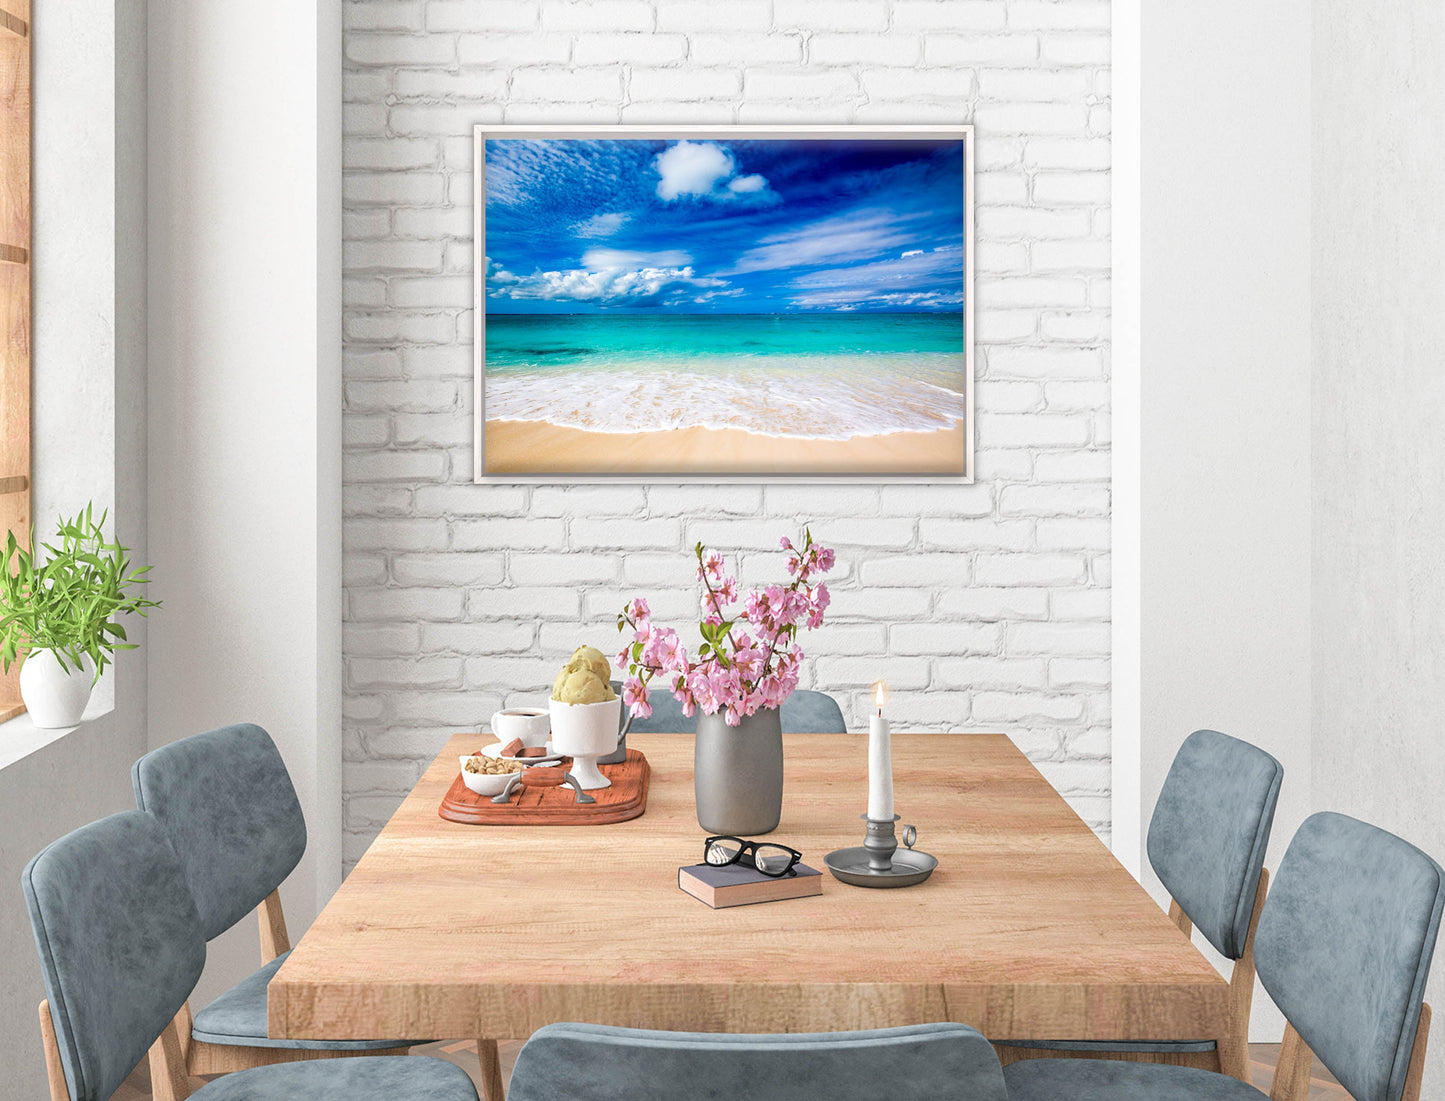 White Sand Beach - Evening on the Pond - Canvas Wrap - White Frame on Dining Room Room Wall